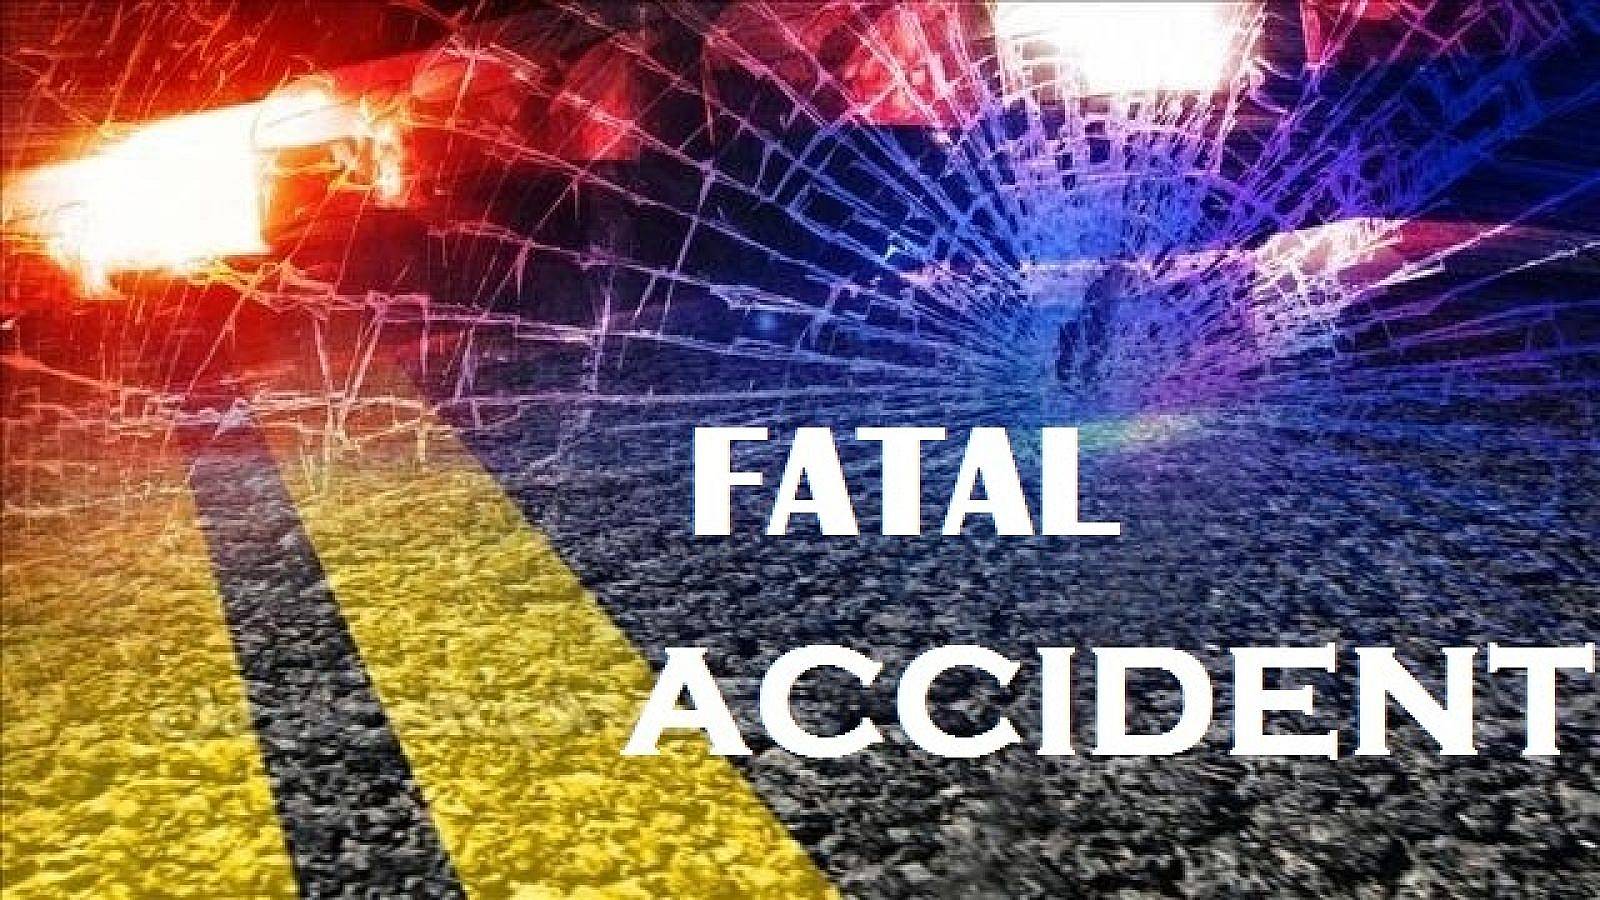 Accident-FAtal-2_13385-1